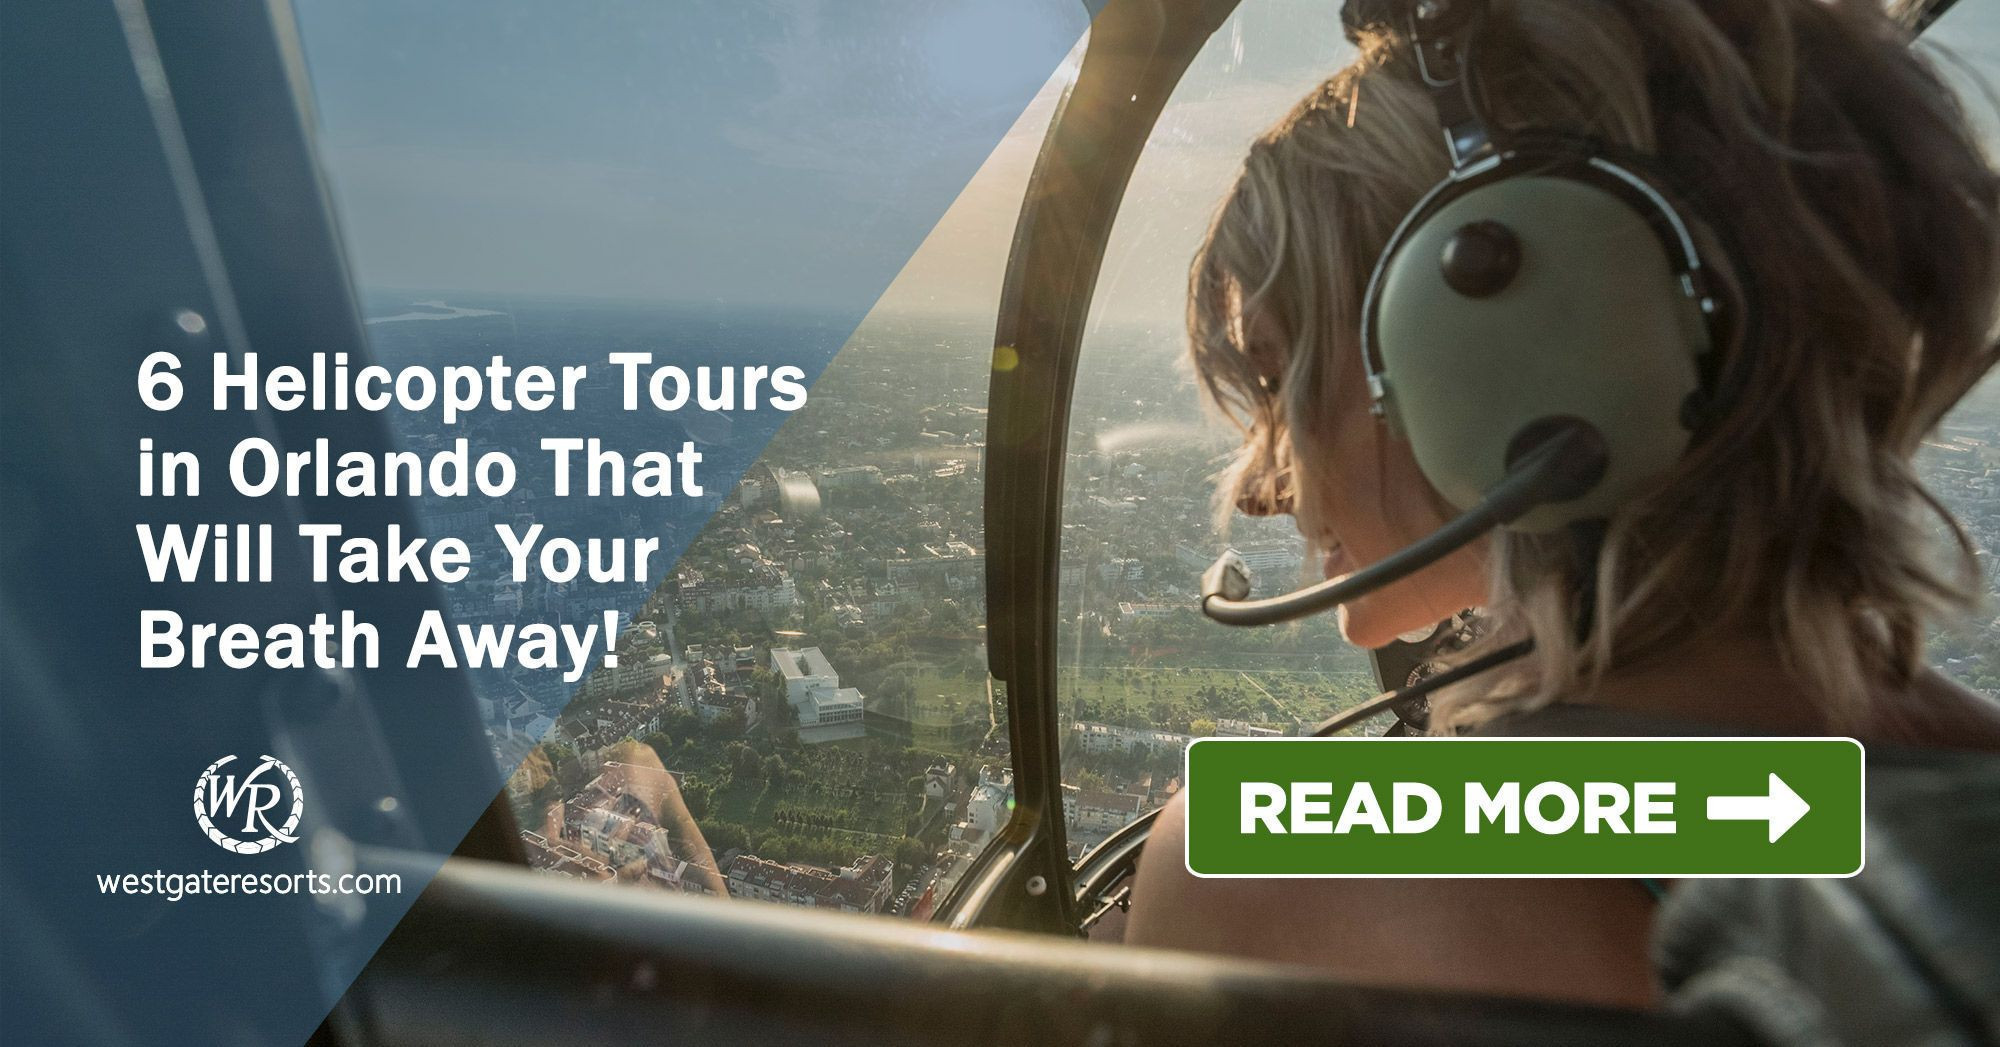 6 Helicopter Tours in Orlando That Will Take Your Breath Away!